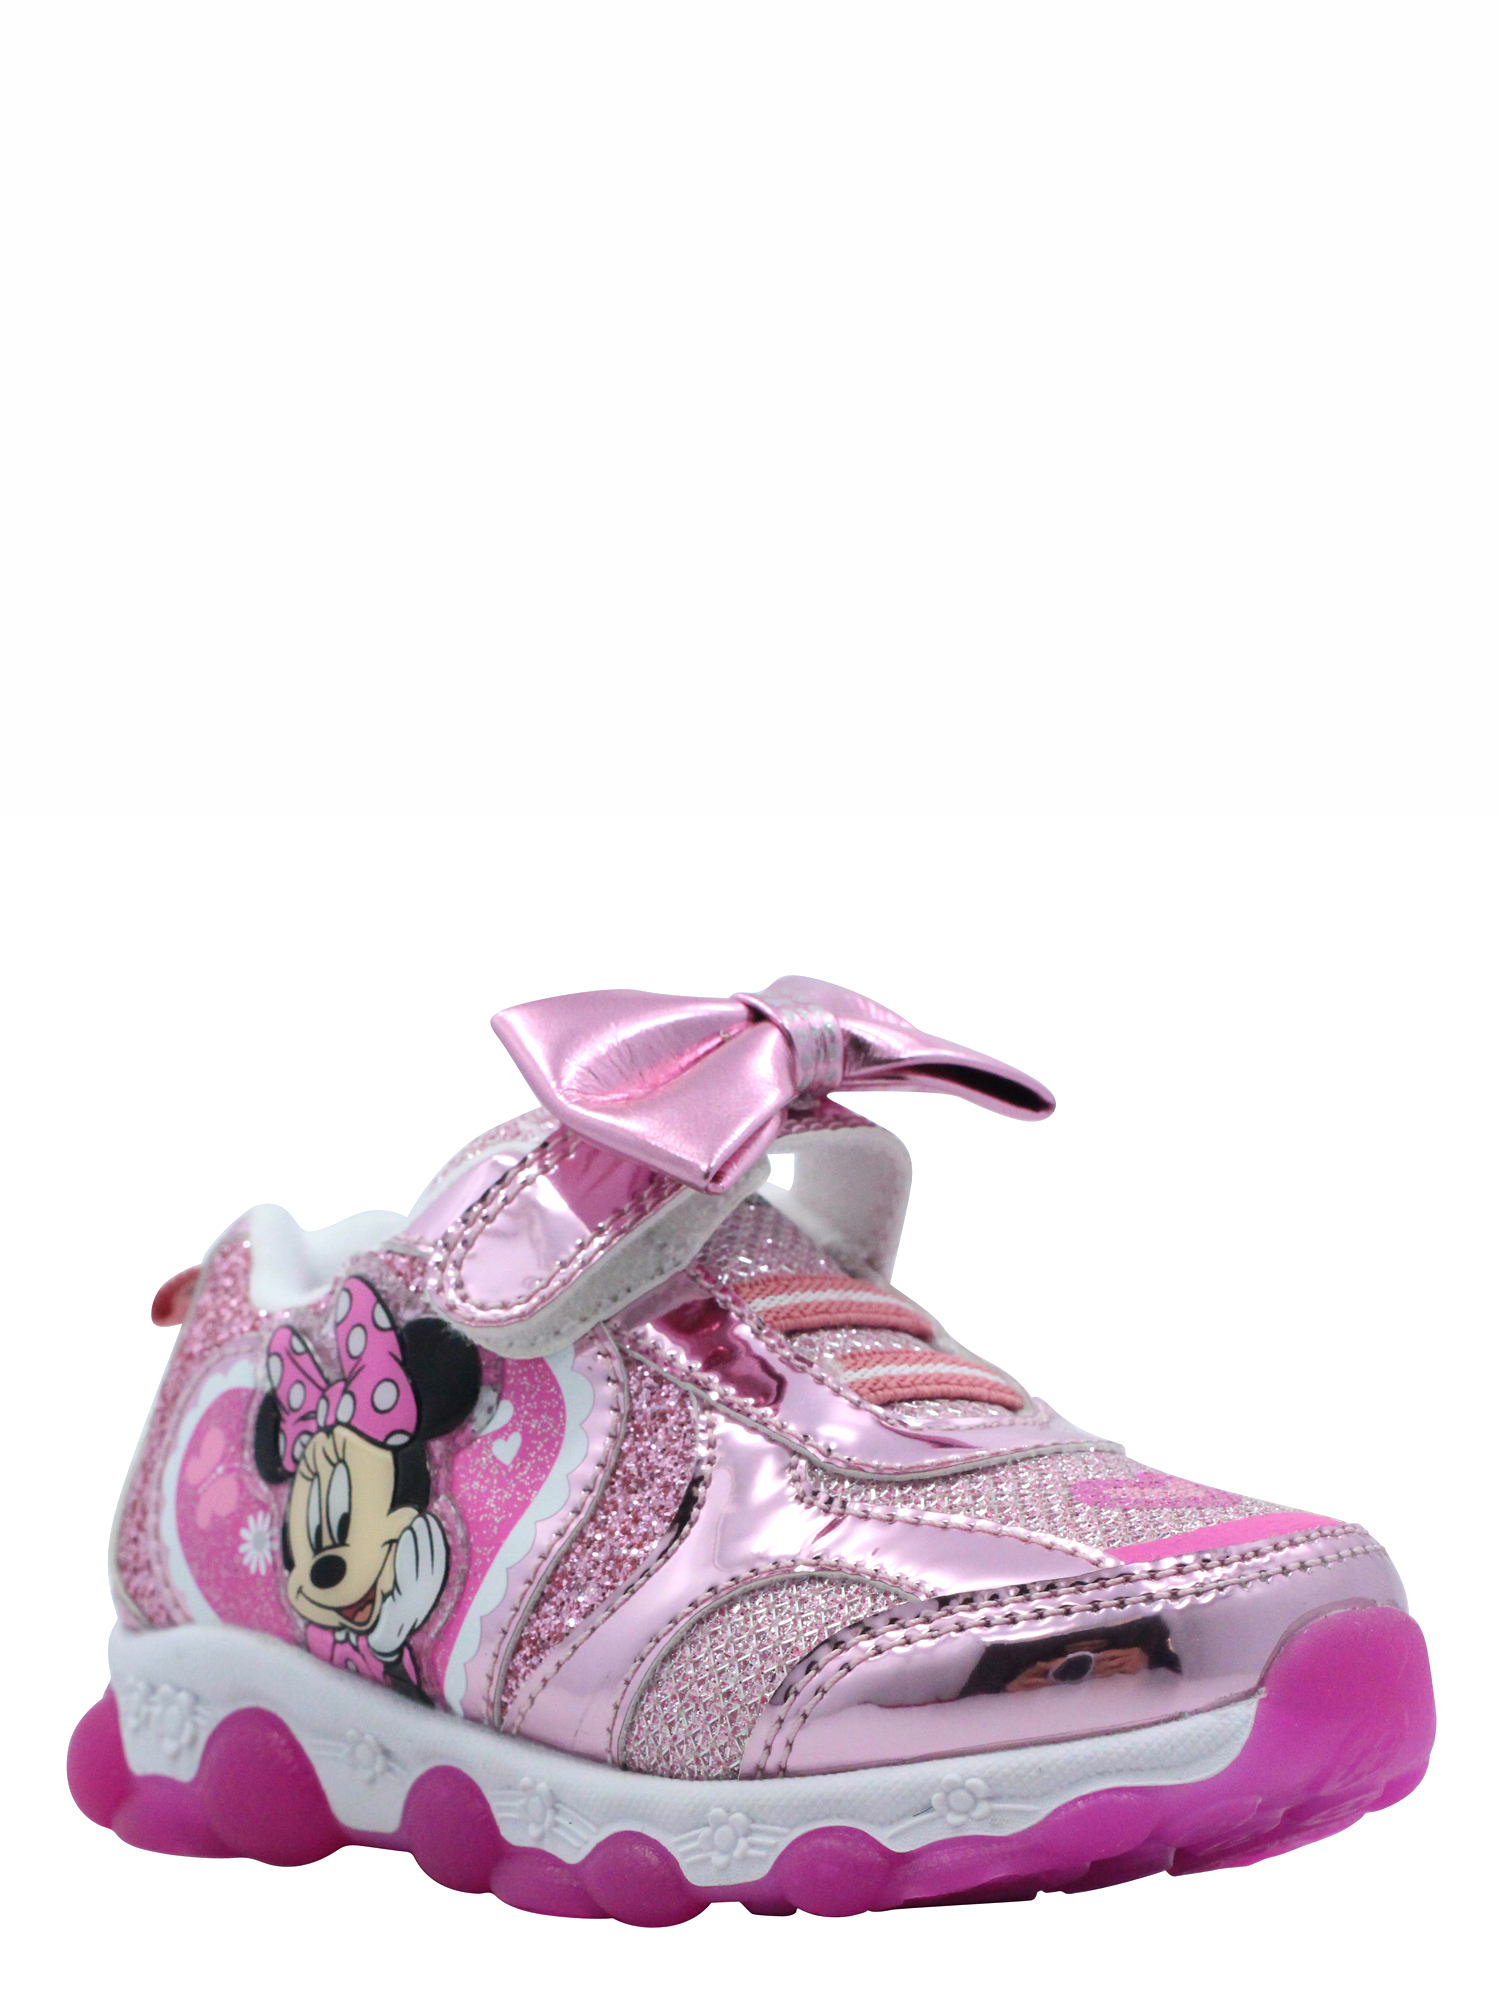 Minnie Mouse athletic - image 1 of 5